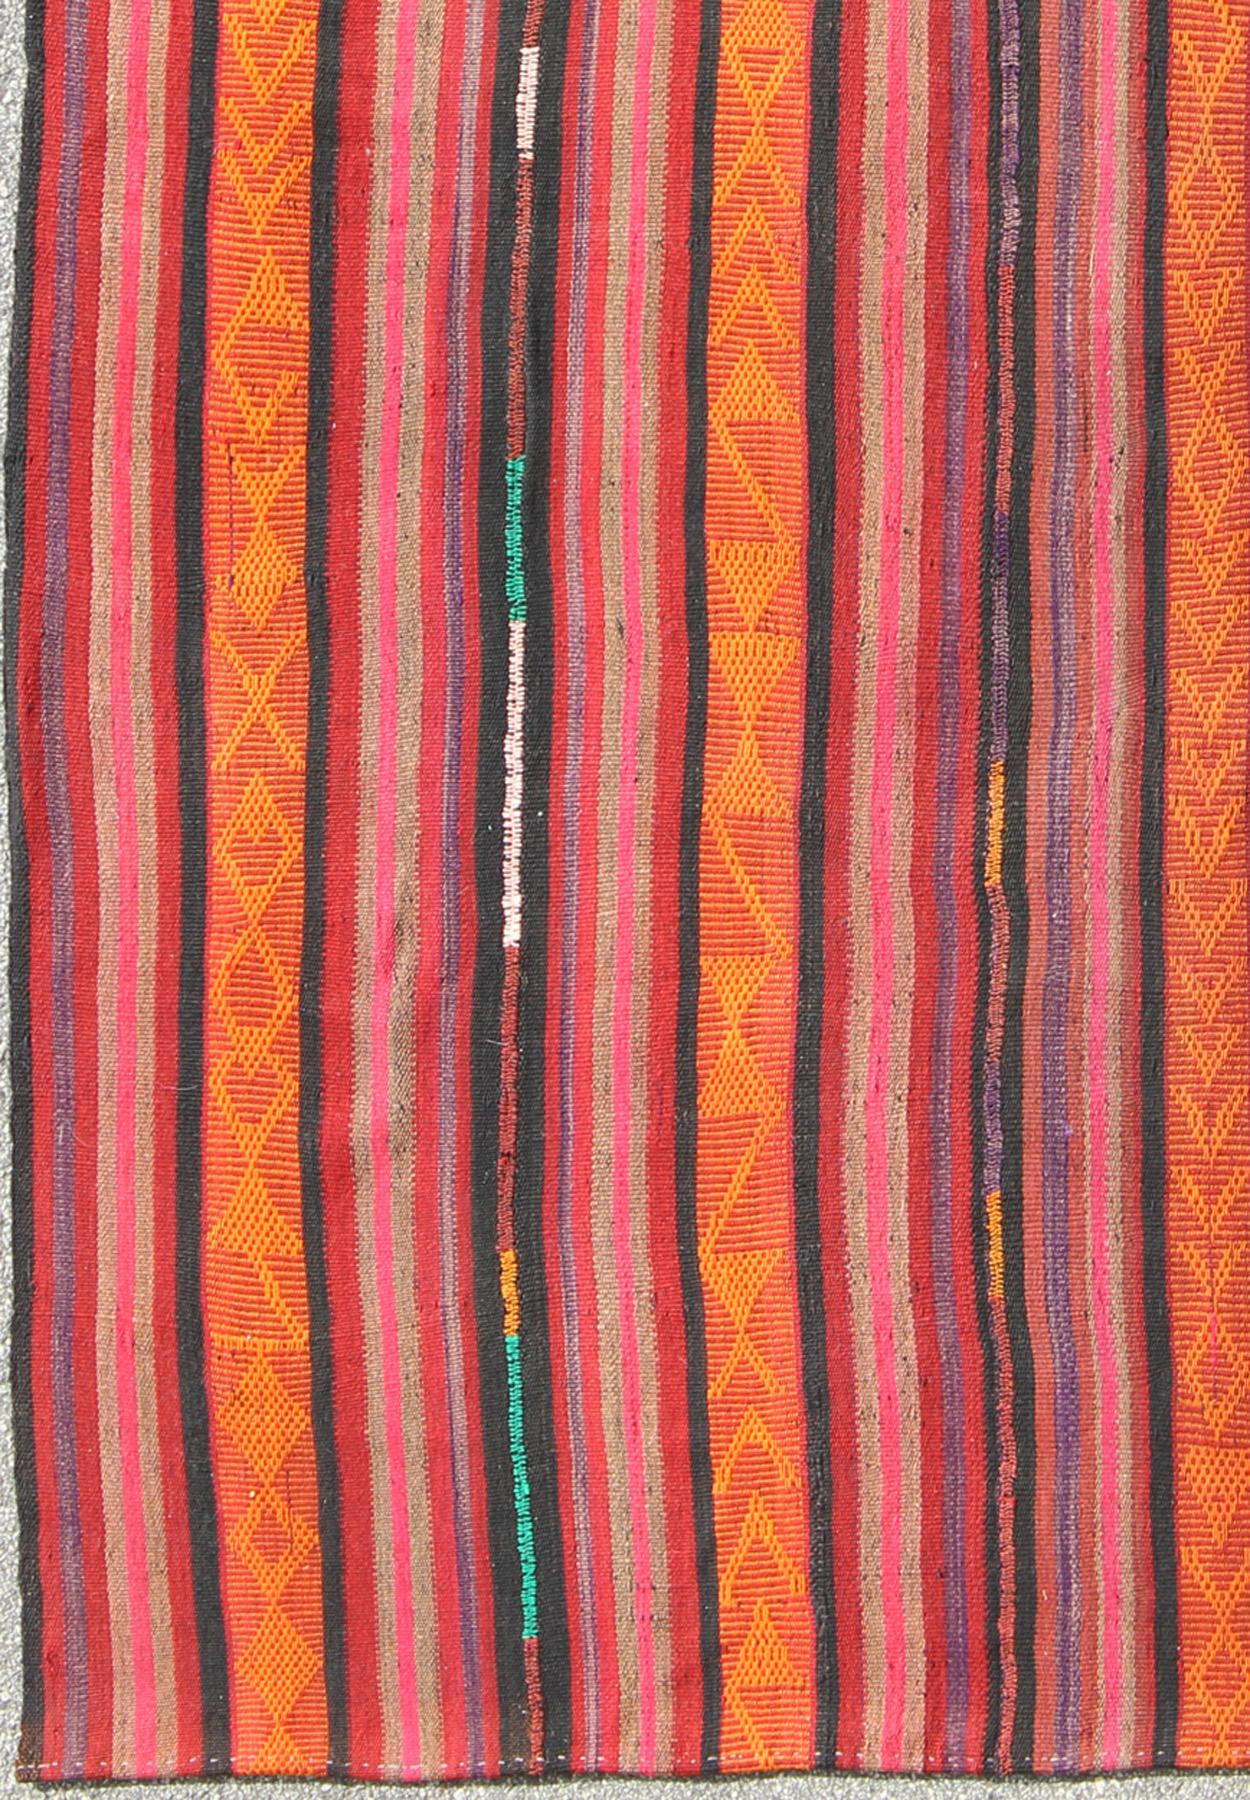 Hand-Woven Vintage Flat-Weave Turkish Kilim in Charcoal, Orange, Purple, Red and Pink For Sale